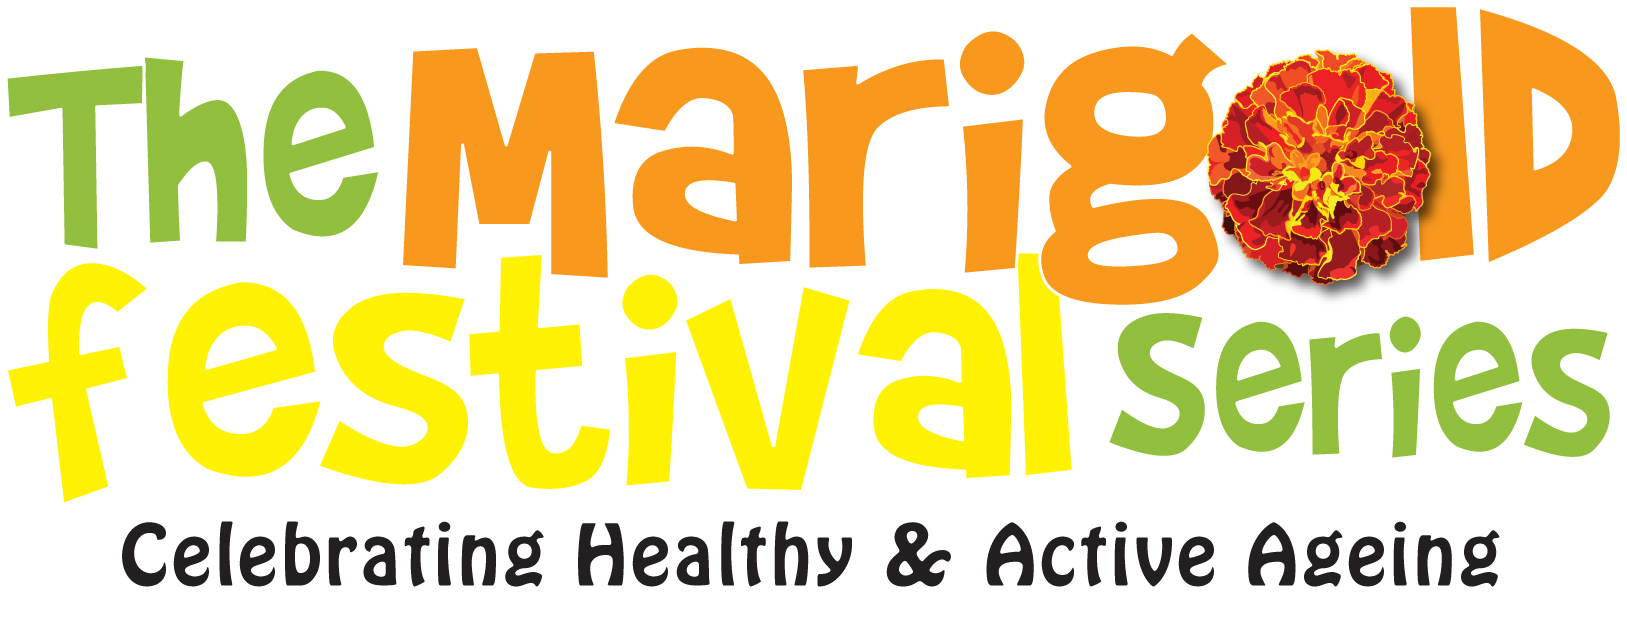 The Marigold Festival Comes to Wexford! County Wexford Chamber